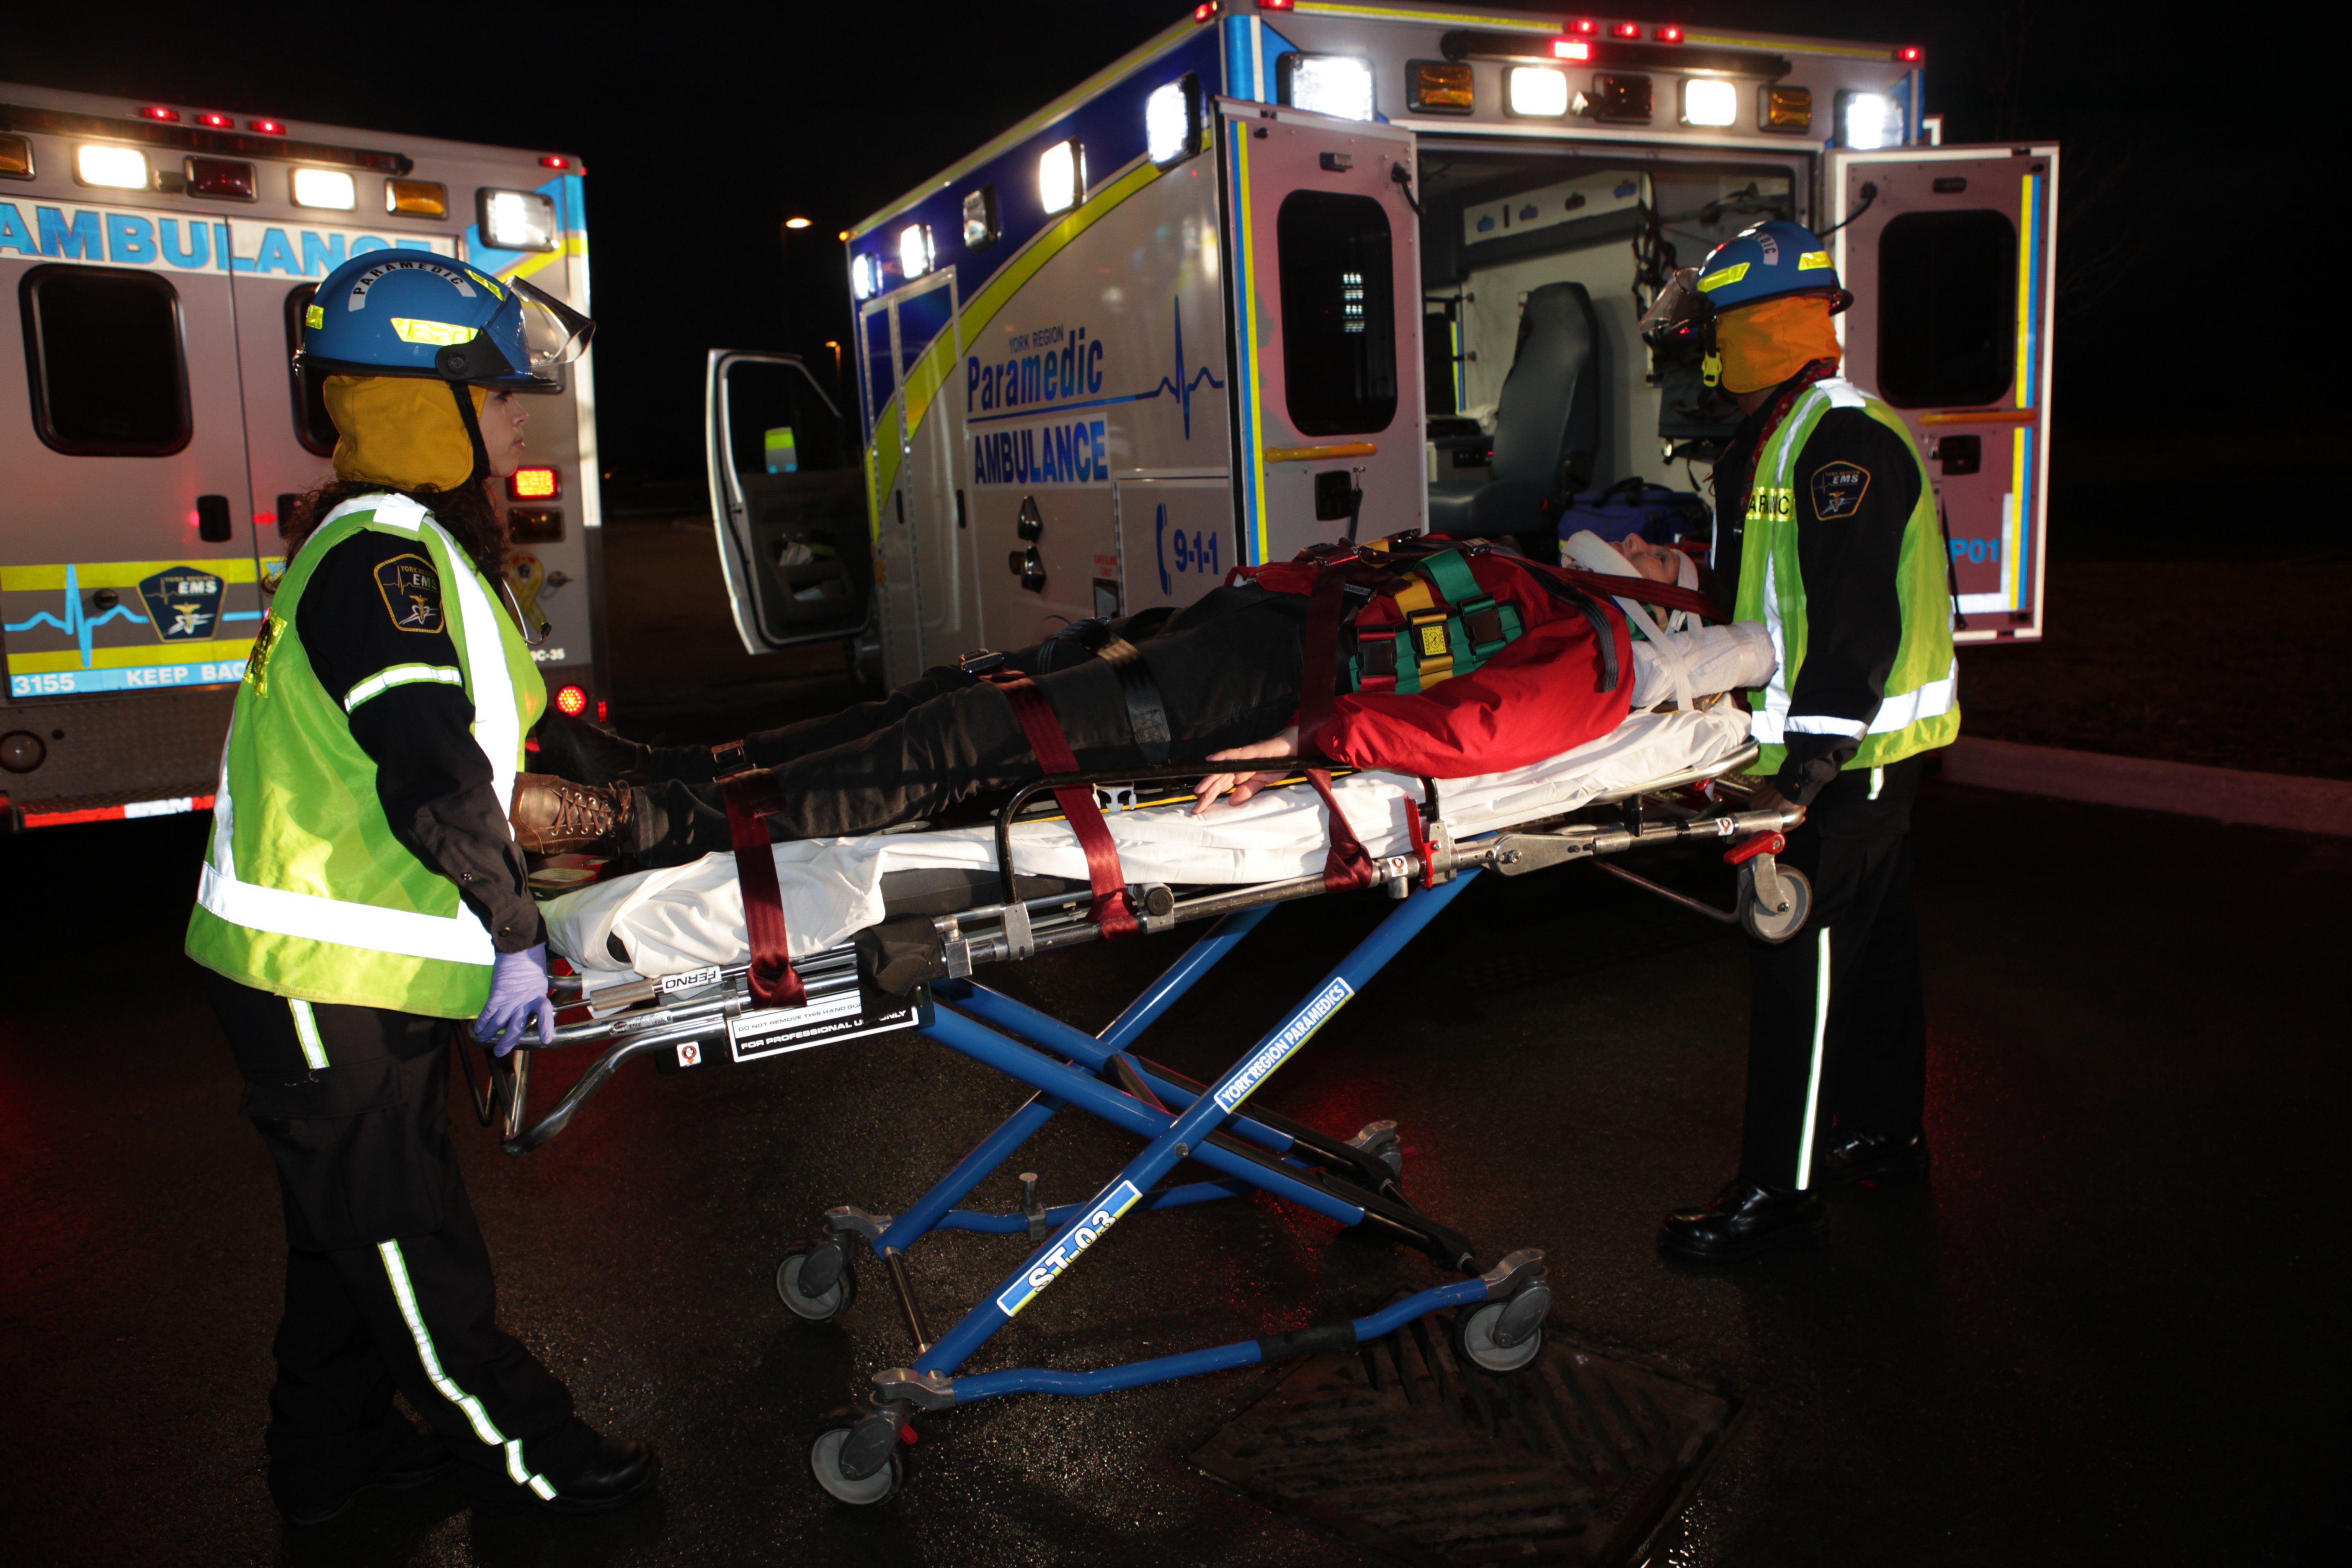 Two paramedics moving a person in a gurney at night in front of two ambulances